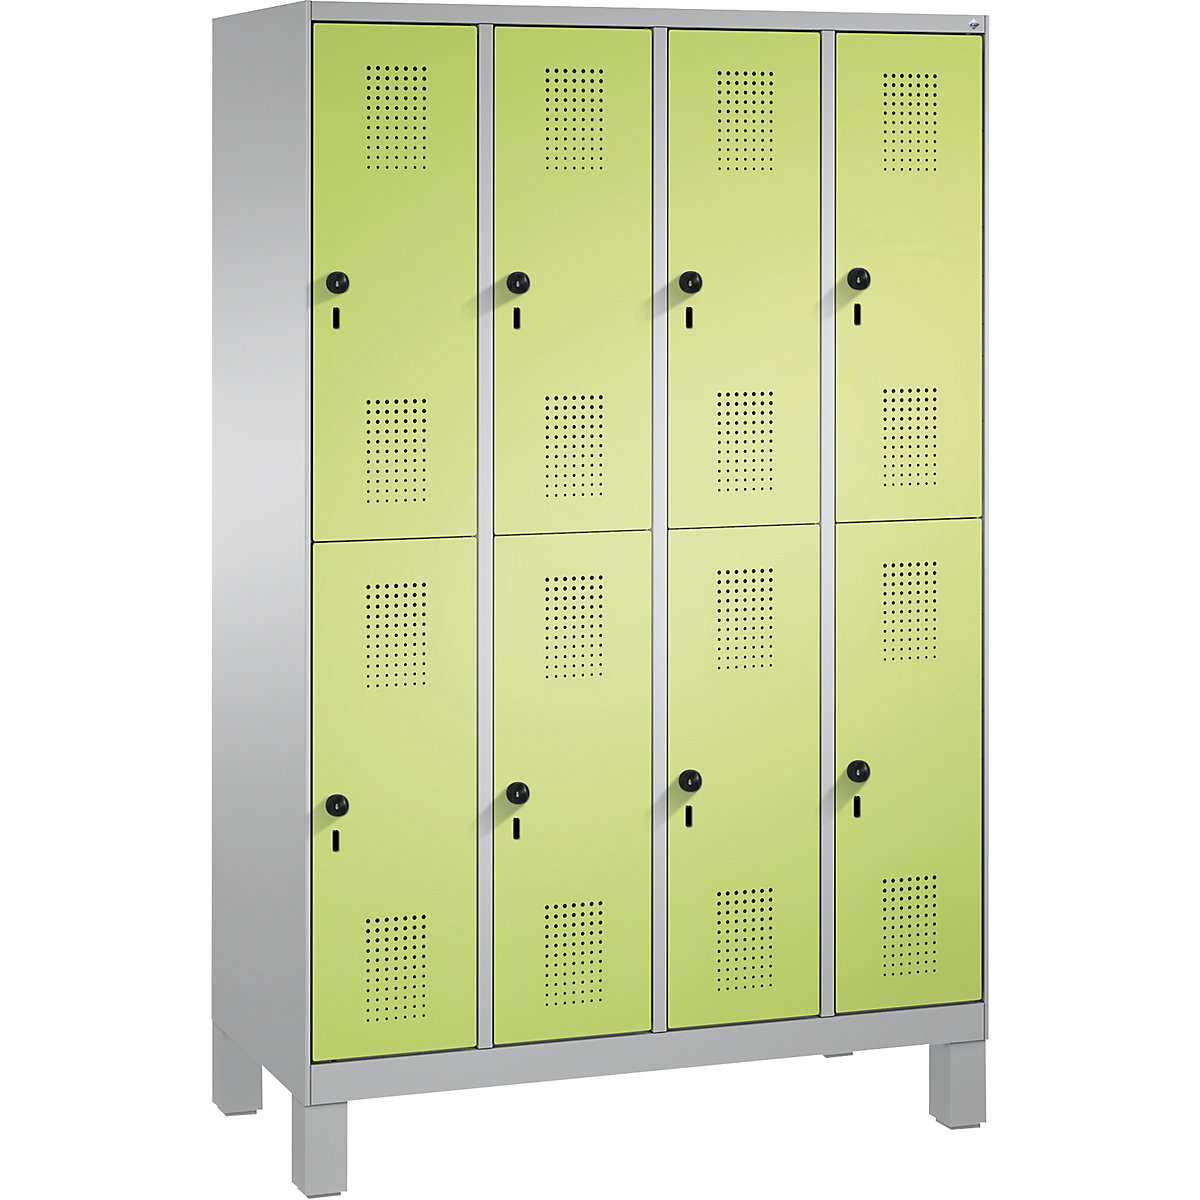 EVOLO cloakroom locker, double tier, with feet – C+P, 4 compartments, 2 shelf compartments each, compartment width 300 mm, white aluminium / viridian green-2